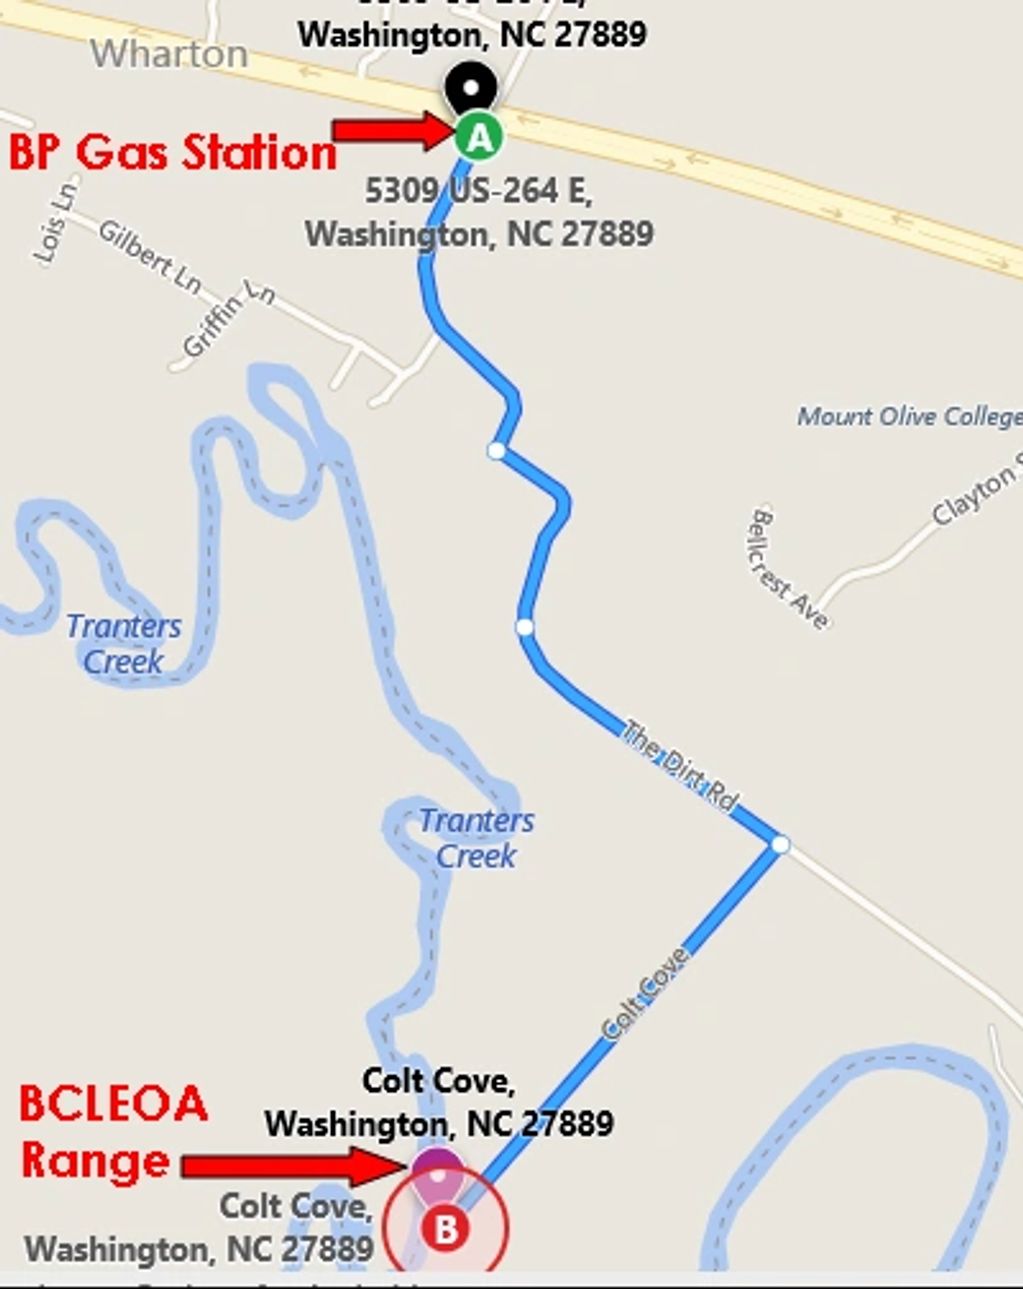 Turn right by the BP gas station on 264 and follow the road down the dirt road. turn right onto Colts Cove Road and the BCLEOA range will be on the right. 